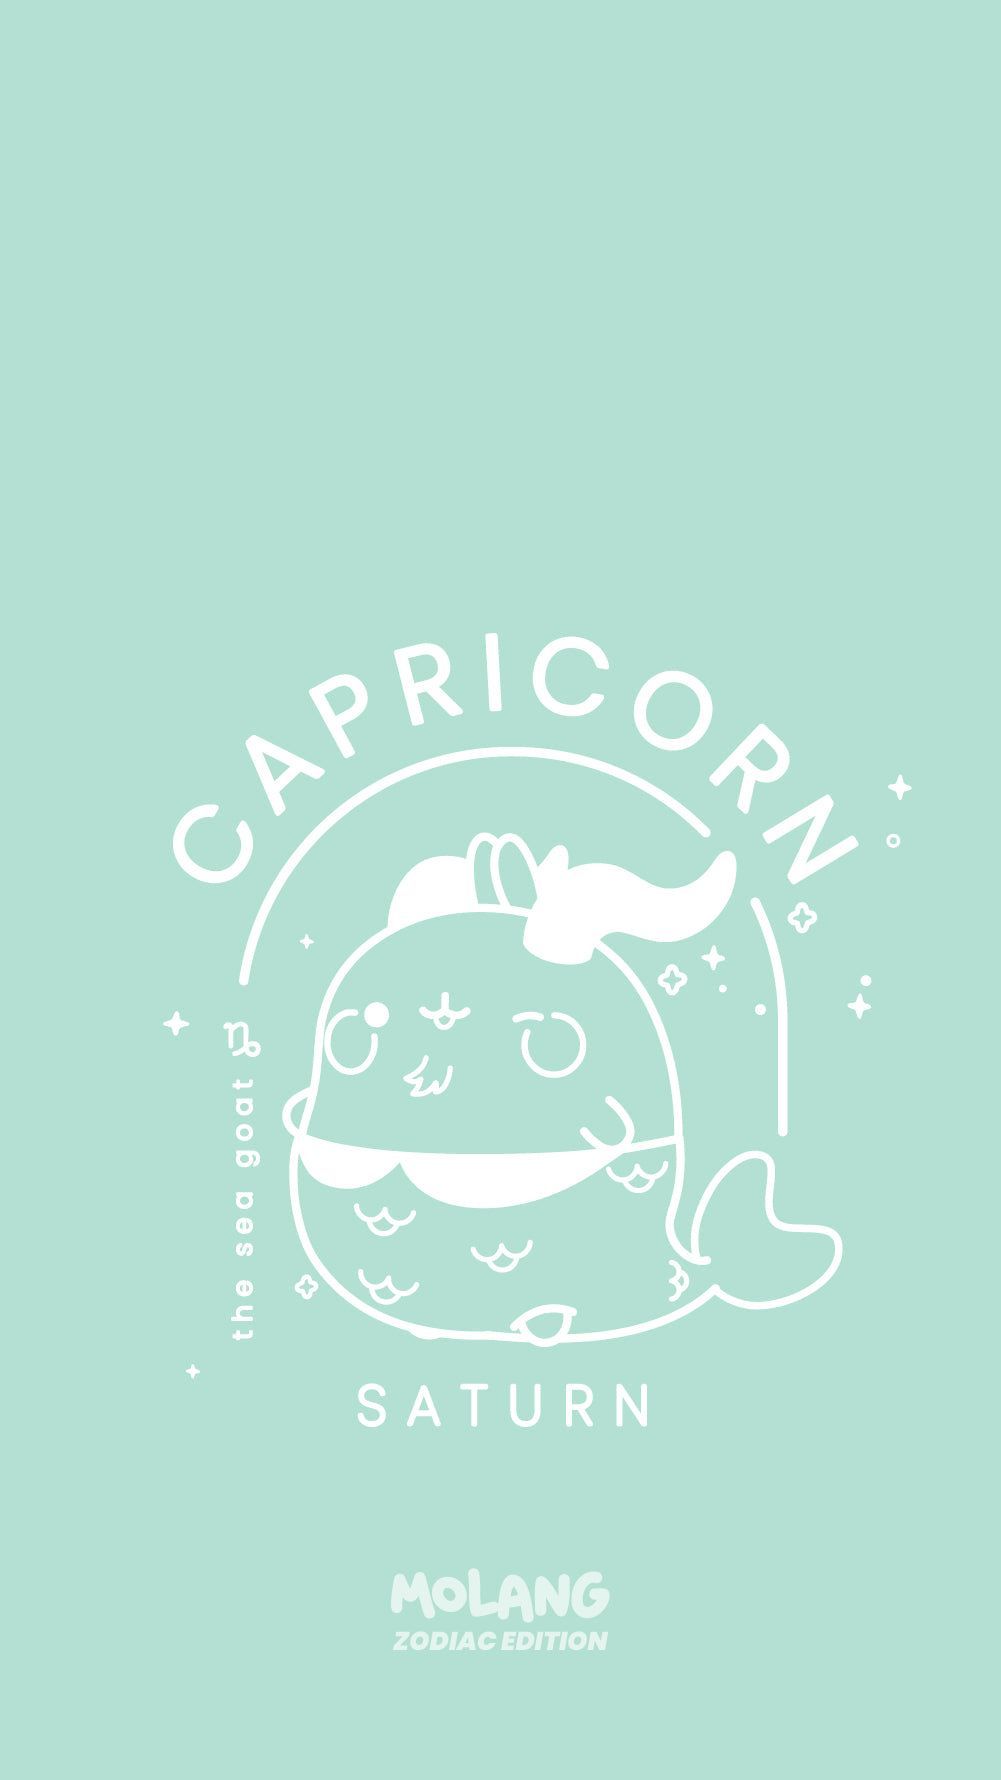 A phone wallpaper of Capricorn Saturn, the sea goat, with a cute and playful illustration. - Molang, Capricorn